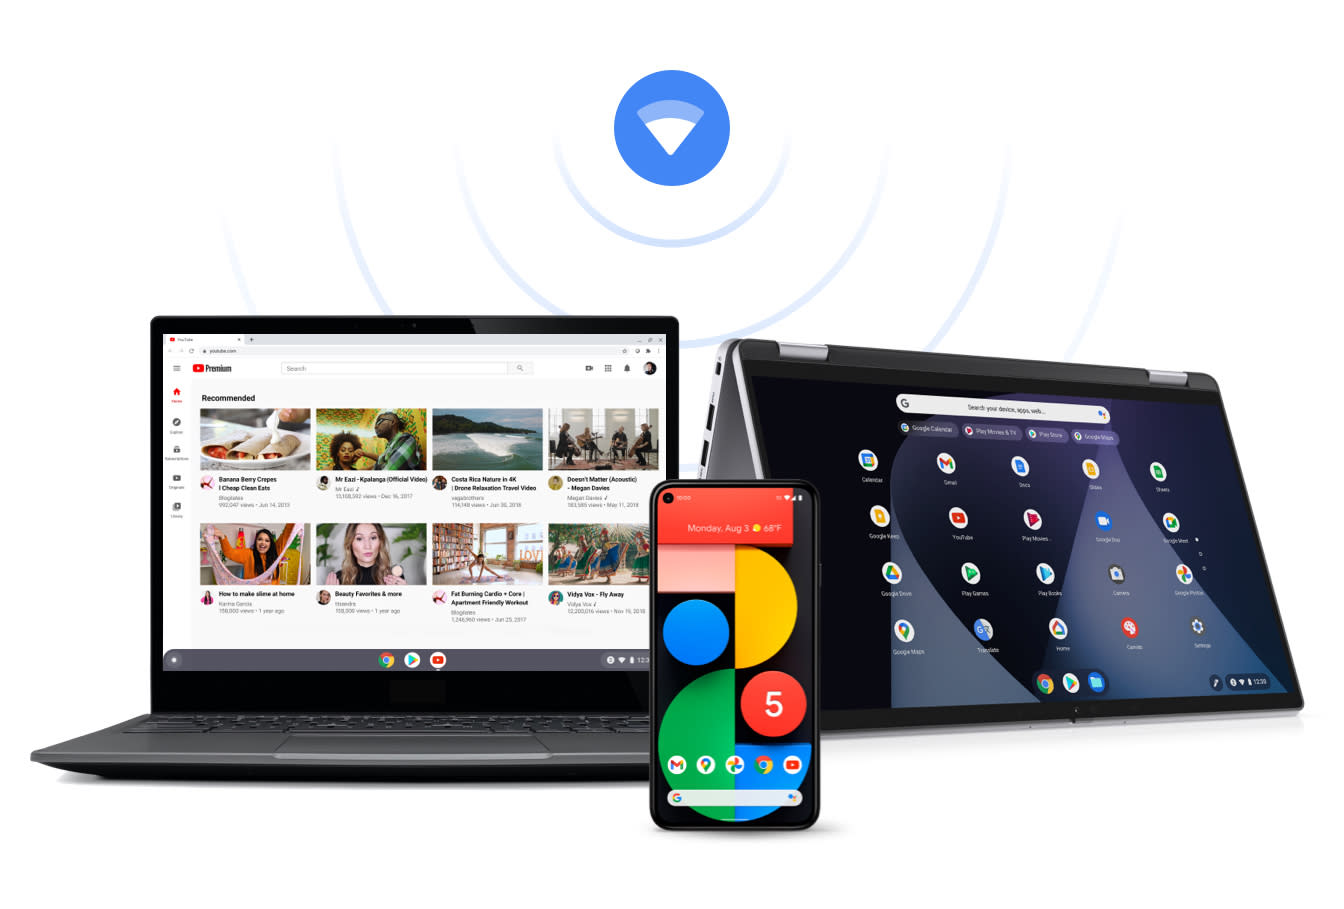 Chrome OS is undergoing a major overhaul on its 10th anniversary